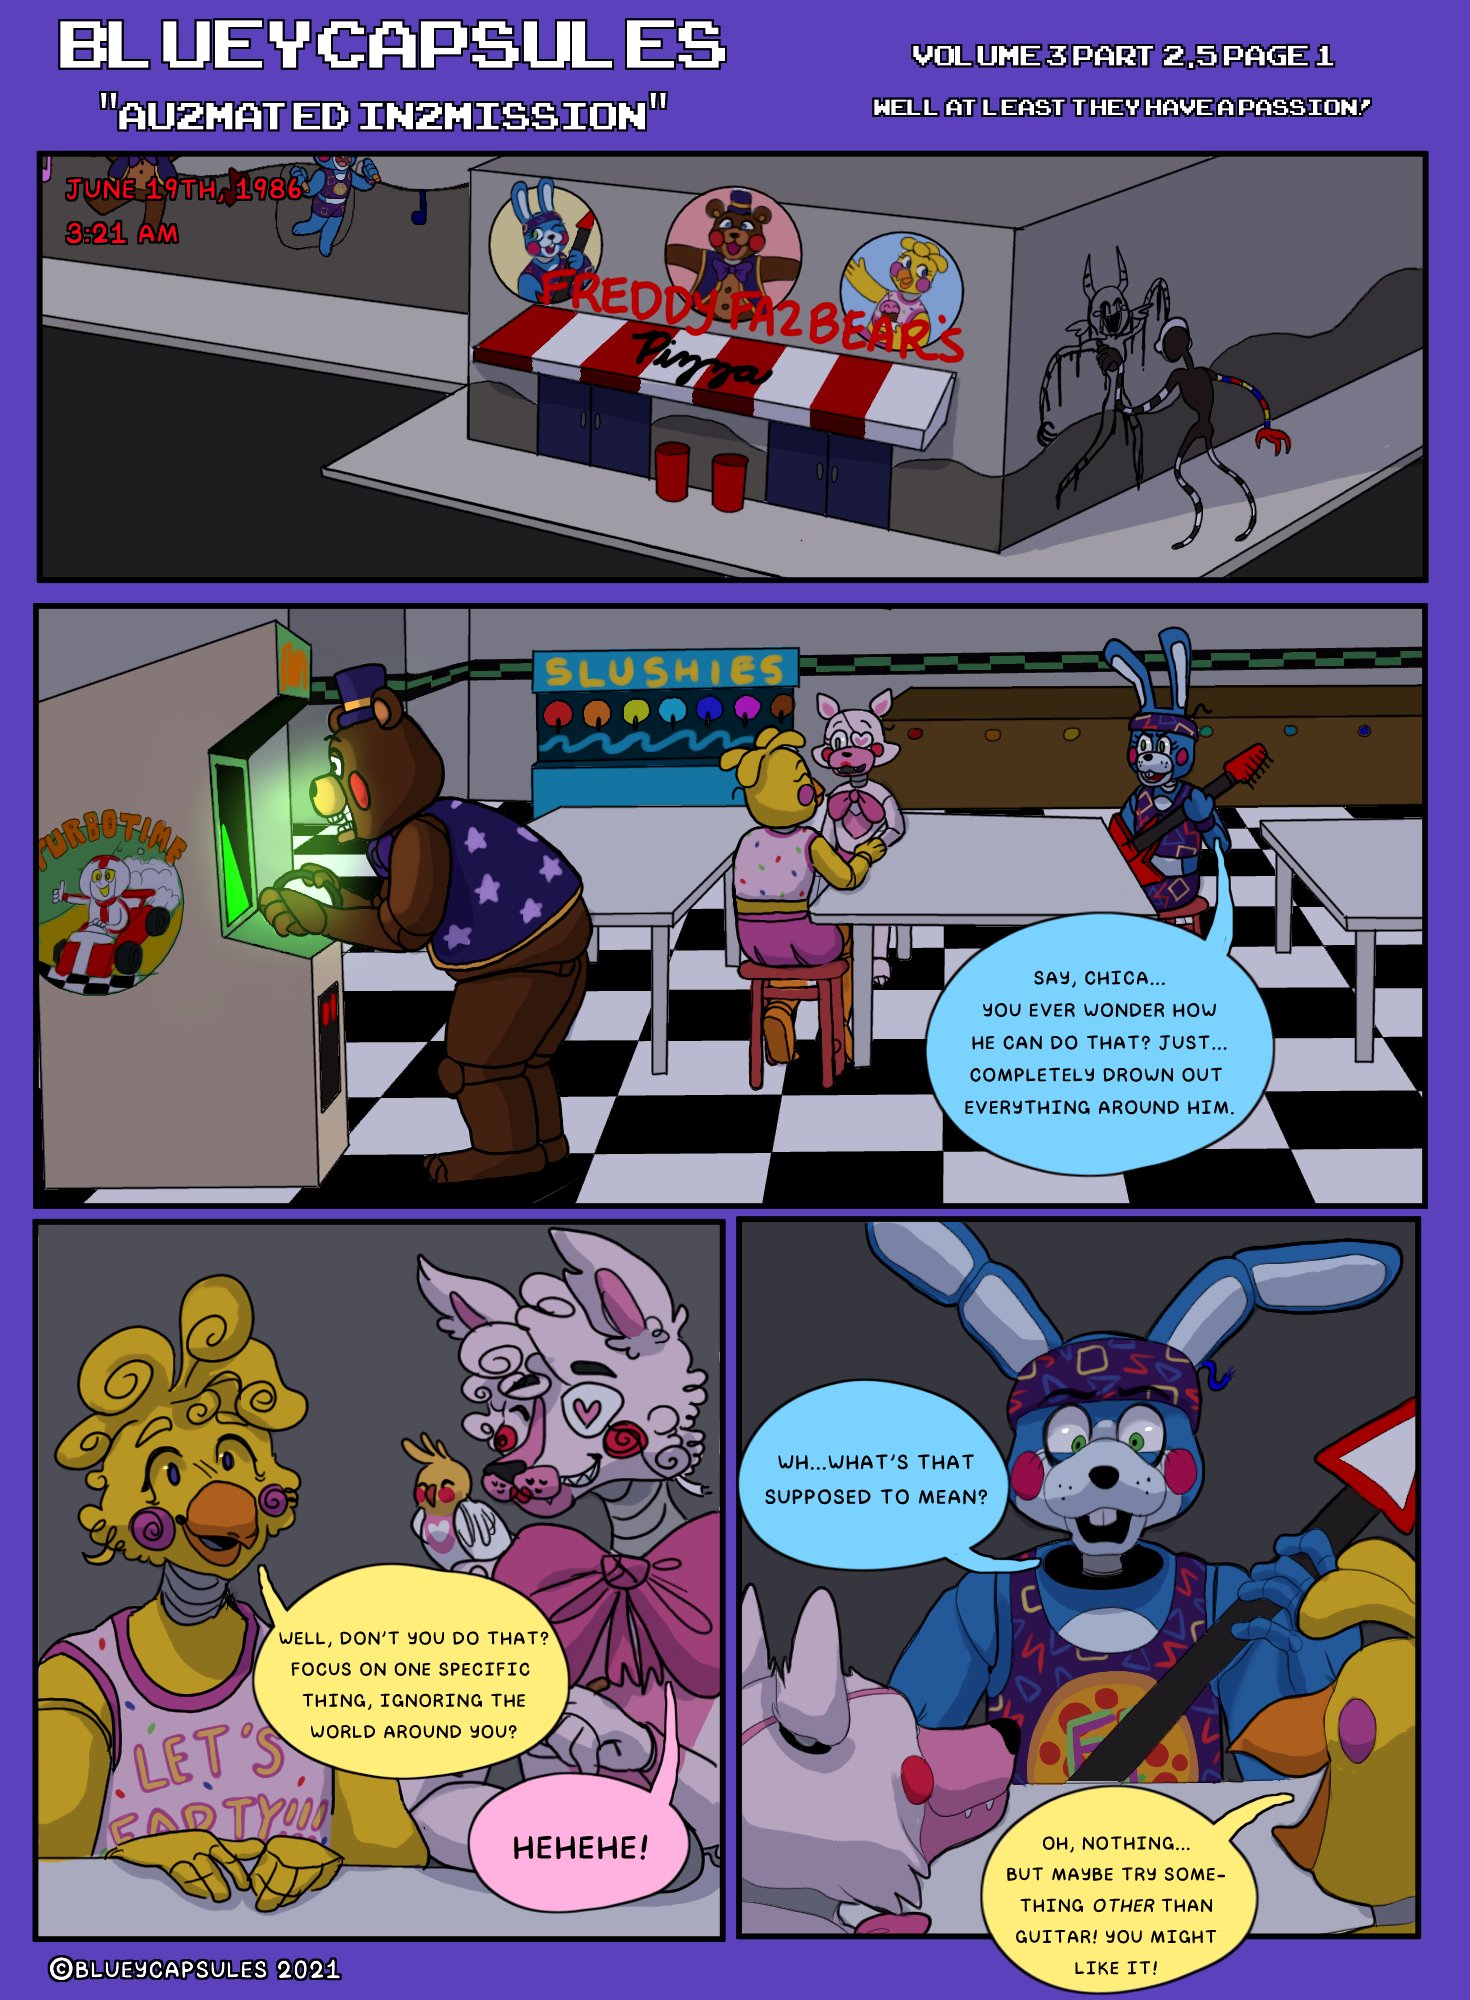 Bluey Capsules BR on X: O tempo acabou #FNAF #blueycapsules